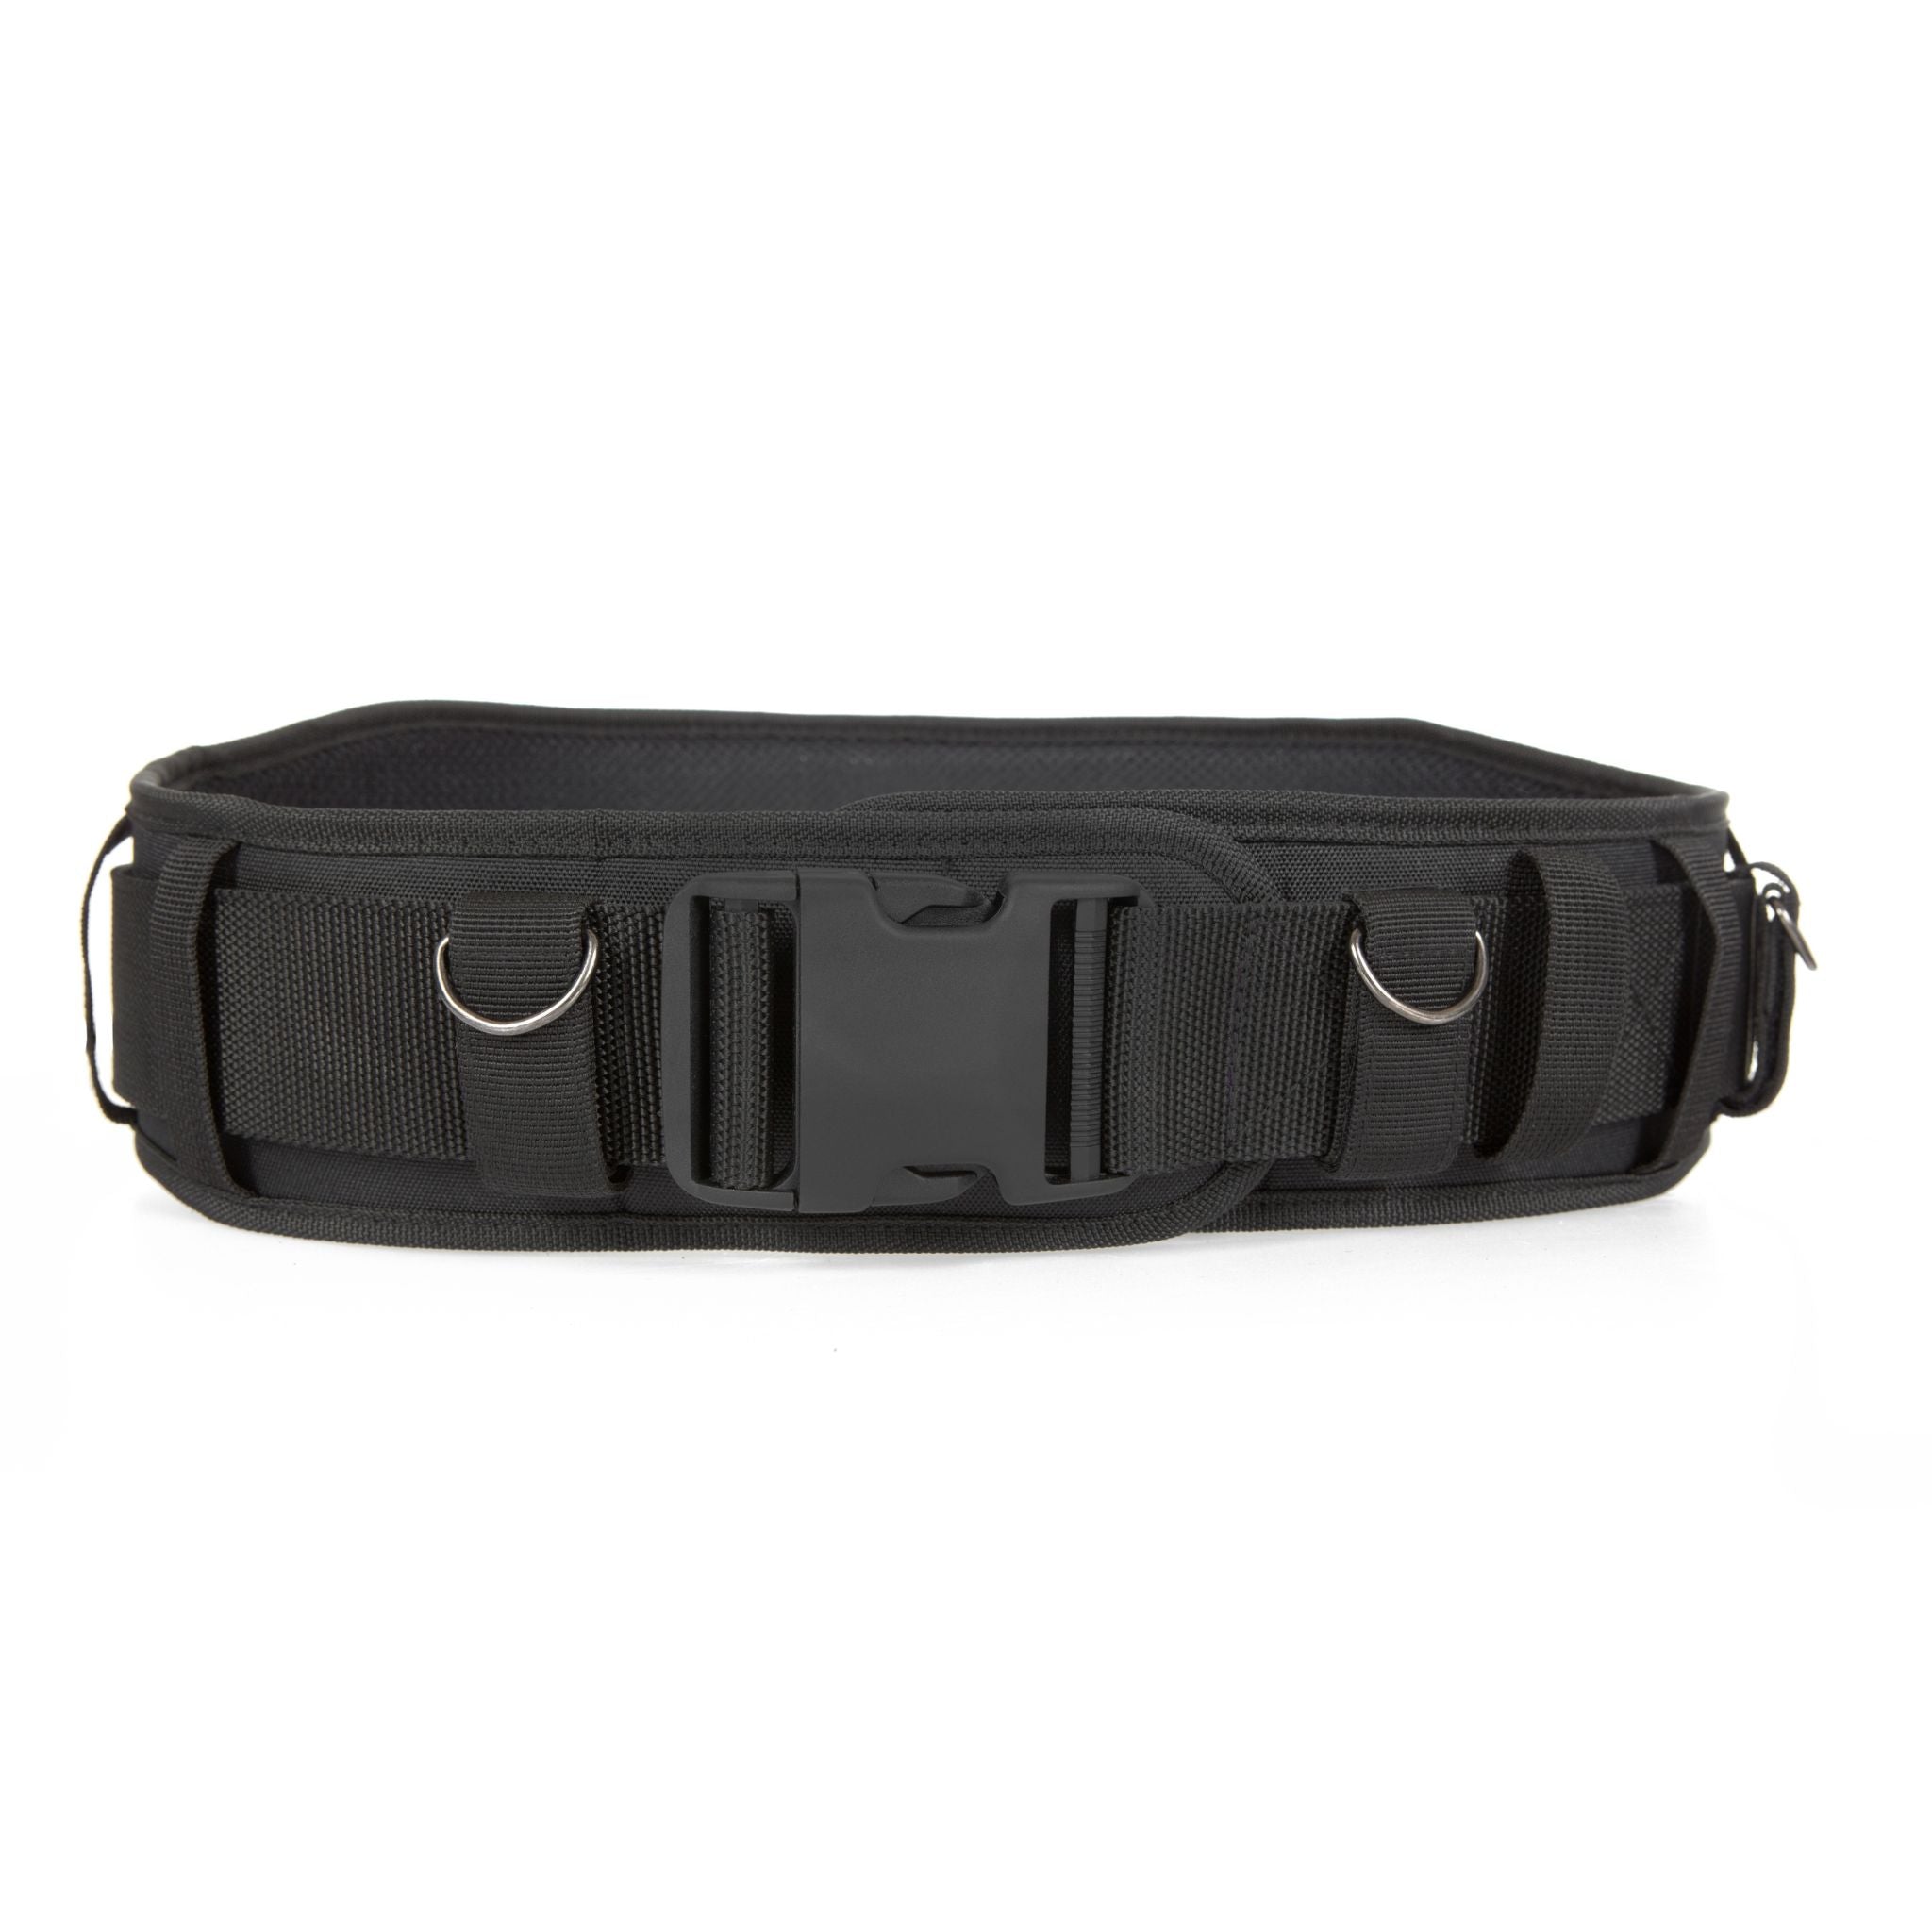 Padded stagehand tool belt with adjustable D-rings